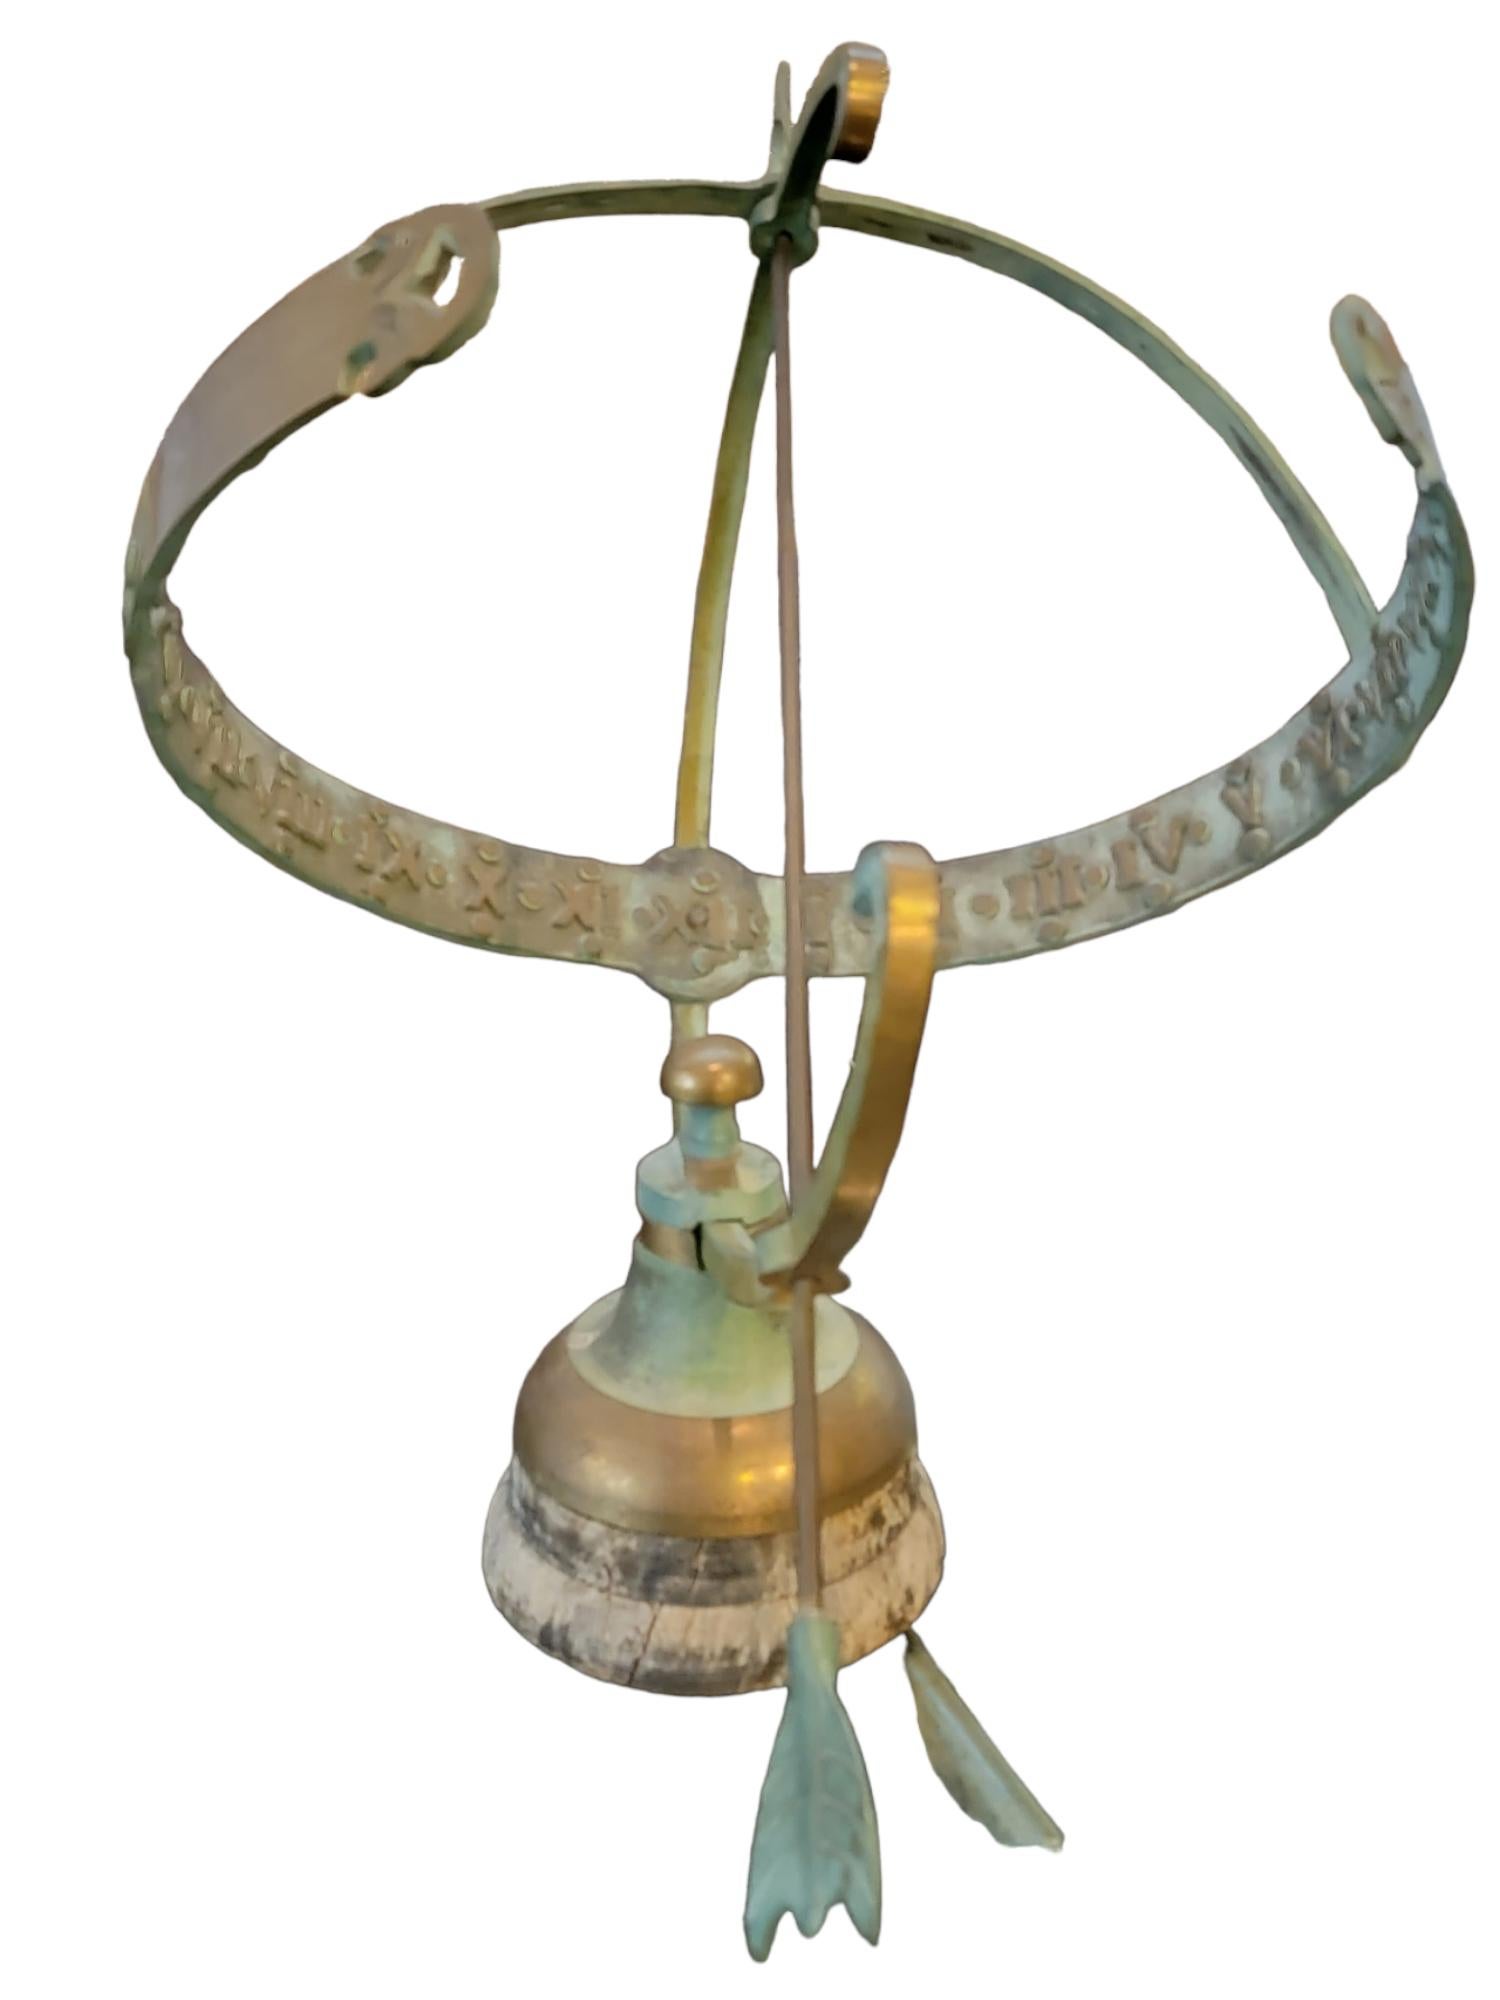 Italian Bronze Armillary Sundial Sculpture With Roman Numerals with wooden base Measures approx - 20h x 15 w x 17 deep.